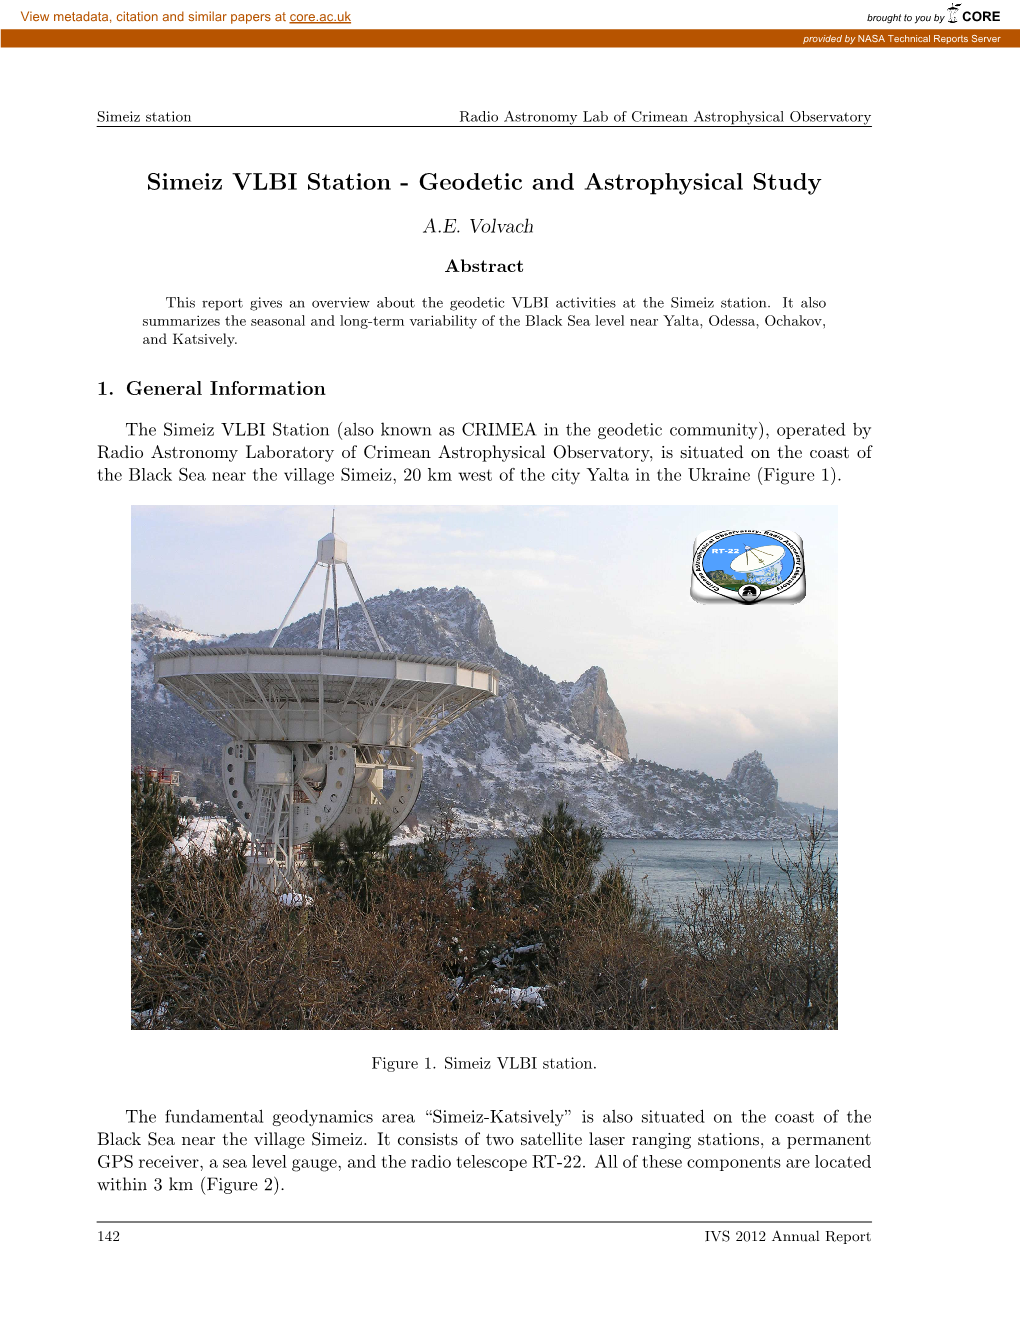 Simeiz VLBI Station - Geodetic and Astrophysical Study A.E